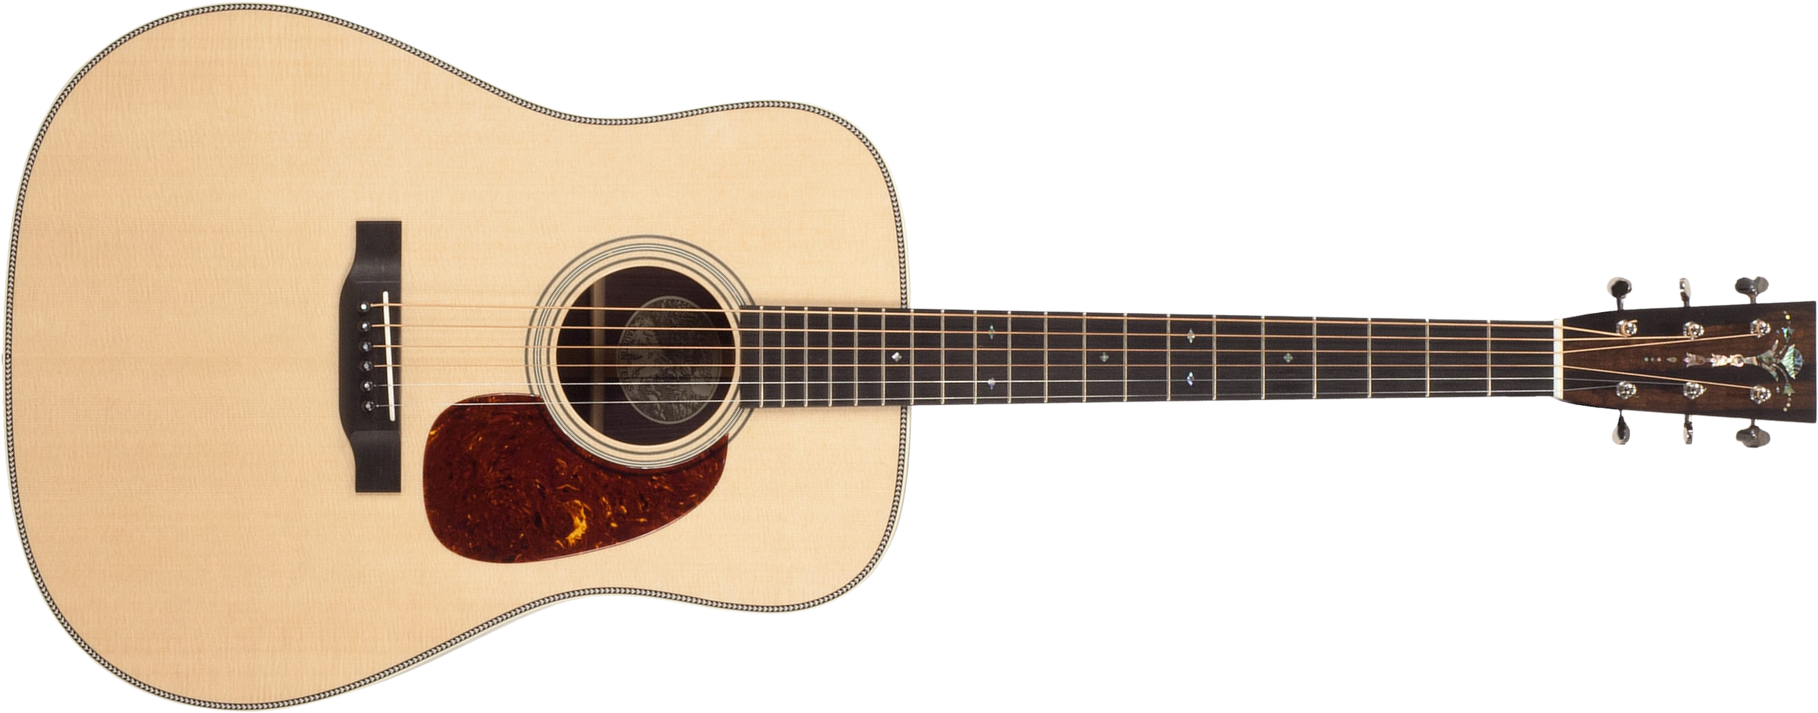 Collings D2h Custom Satin Neck, Torch Head #27113 - Natural - Acoustic guitar & electro - Main picture